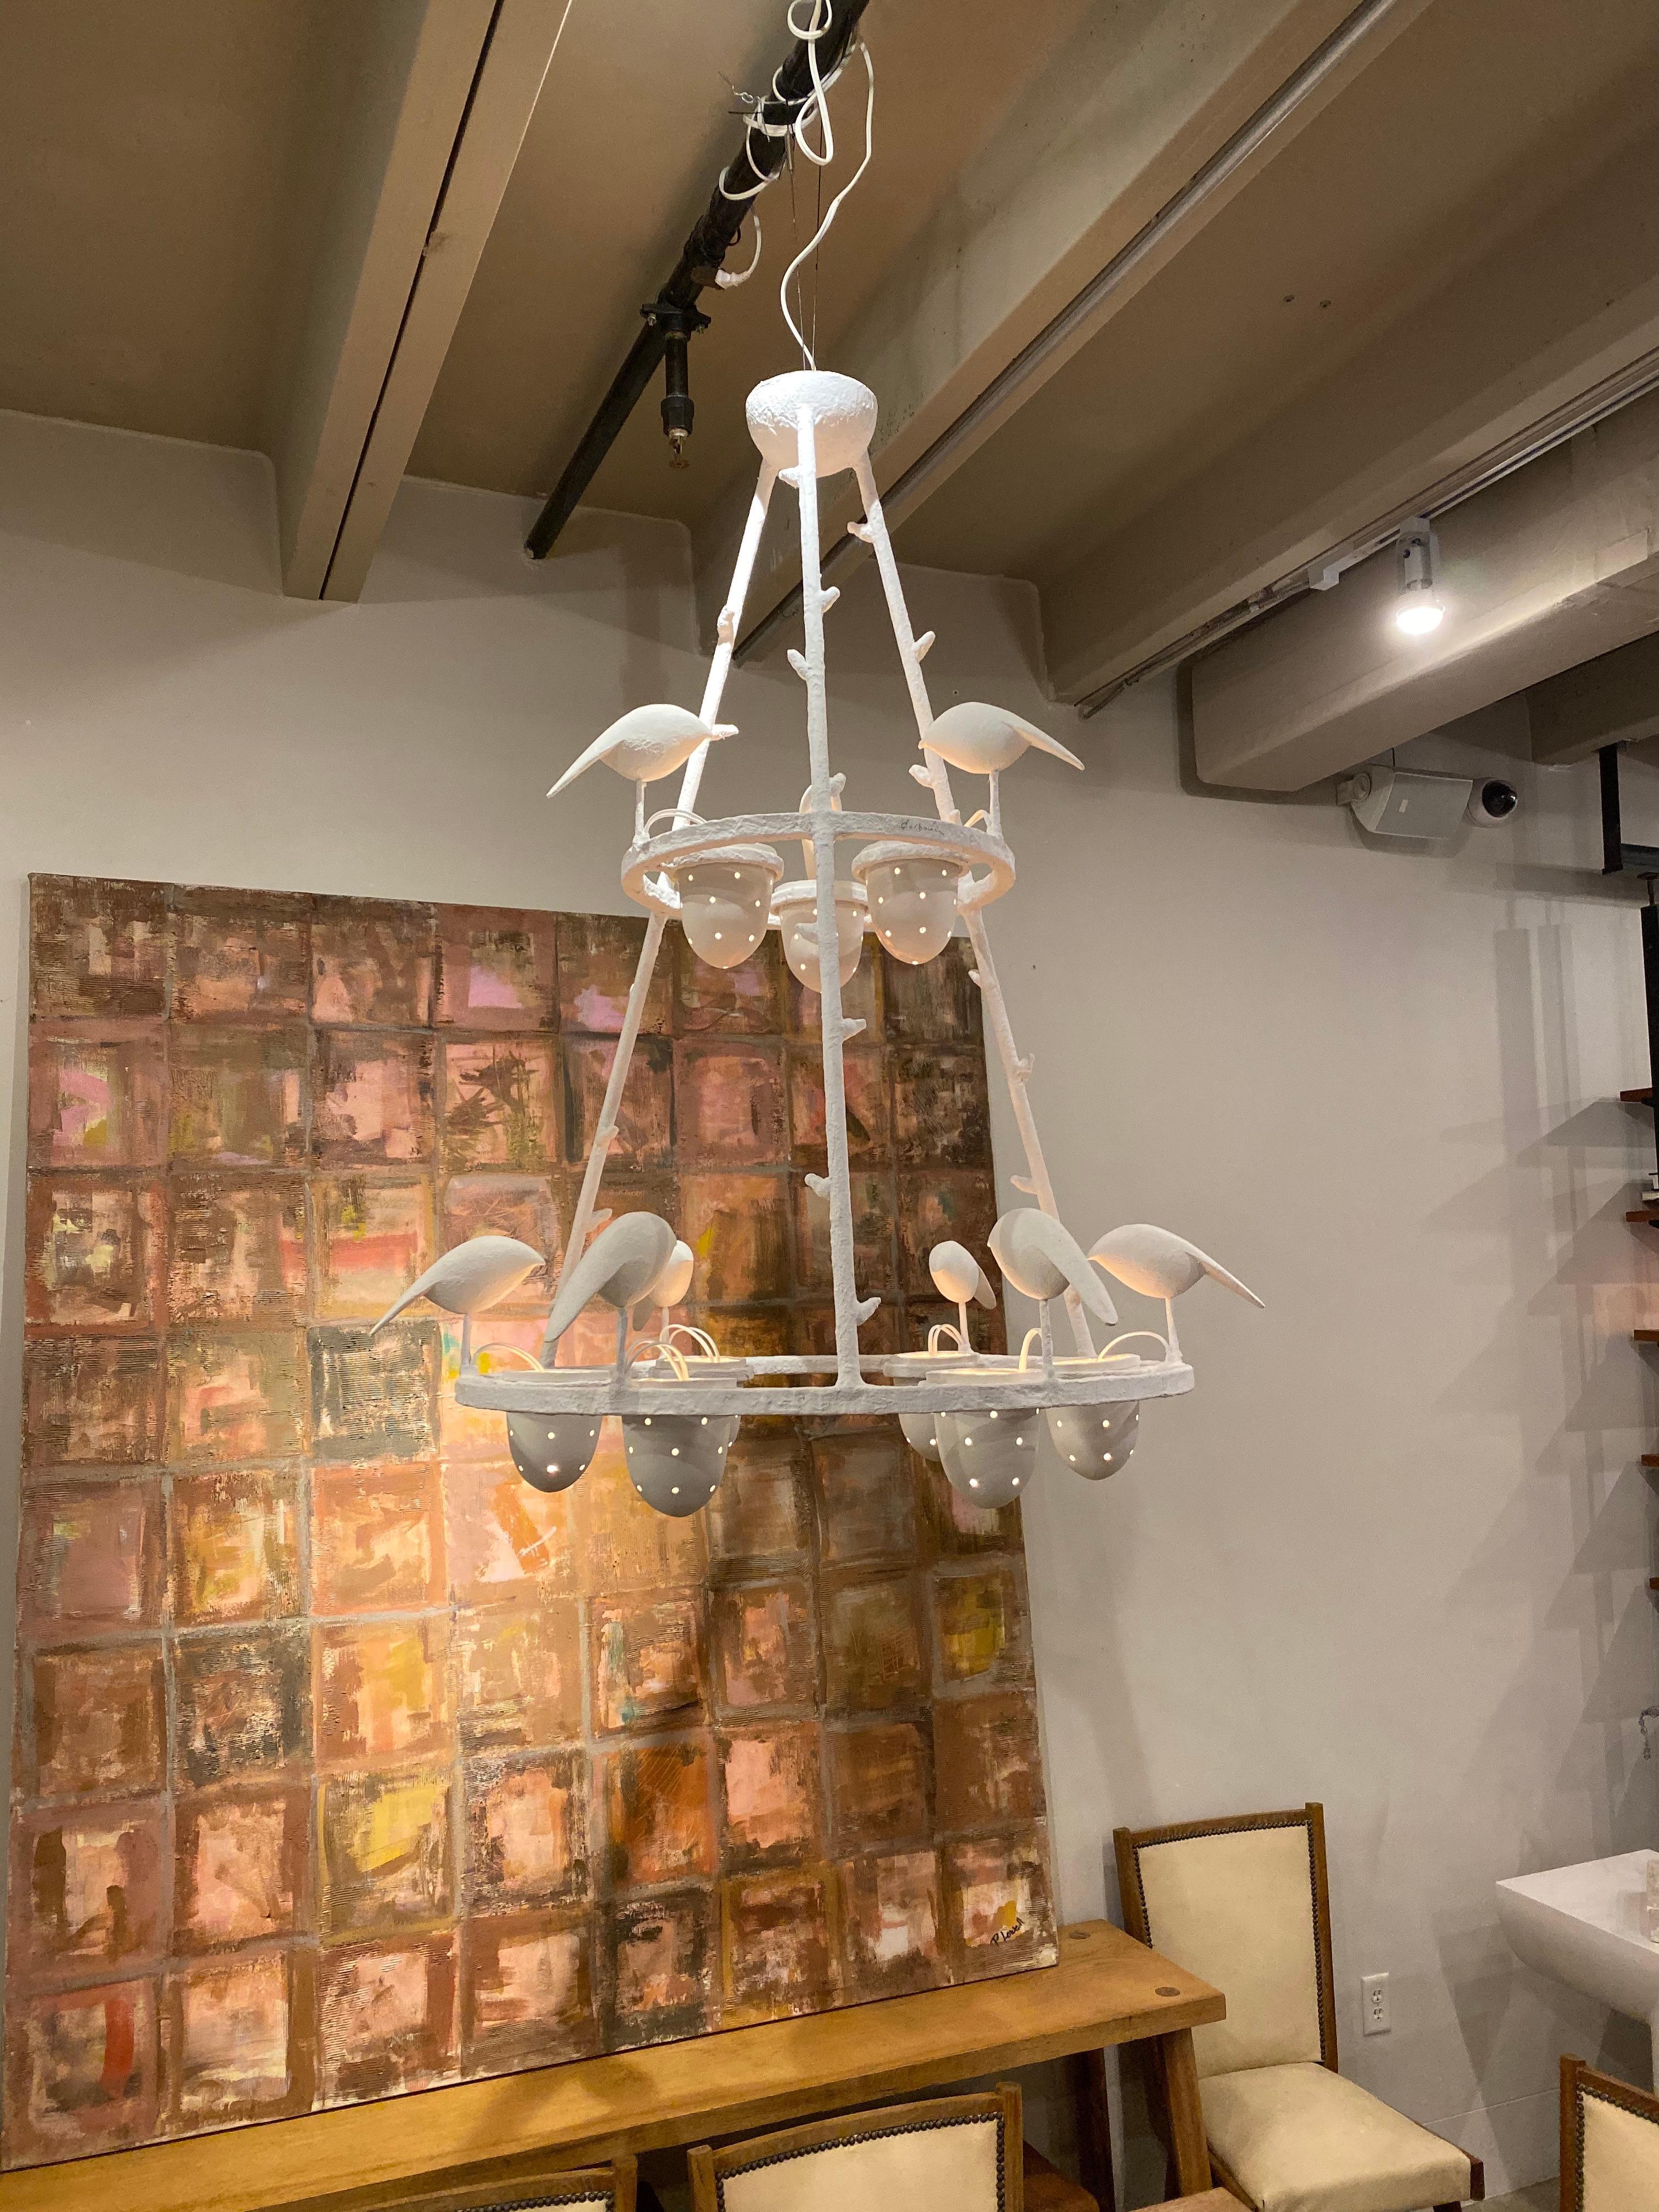 Jacques Darbaud's metal, plaster and porcelain chandelier, France, early 21st century. Plaster birds perch around a metal and plaster frame. Perforated porcelain cups hold the bulbs. Excellent condition. Jacques Darbaud aka Darbaud is a sculptor,